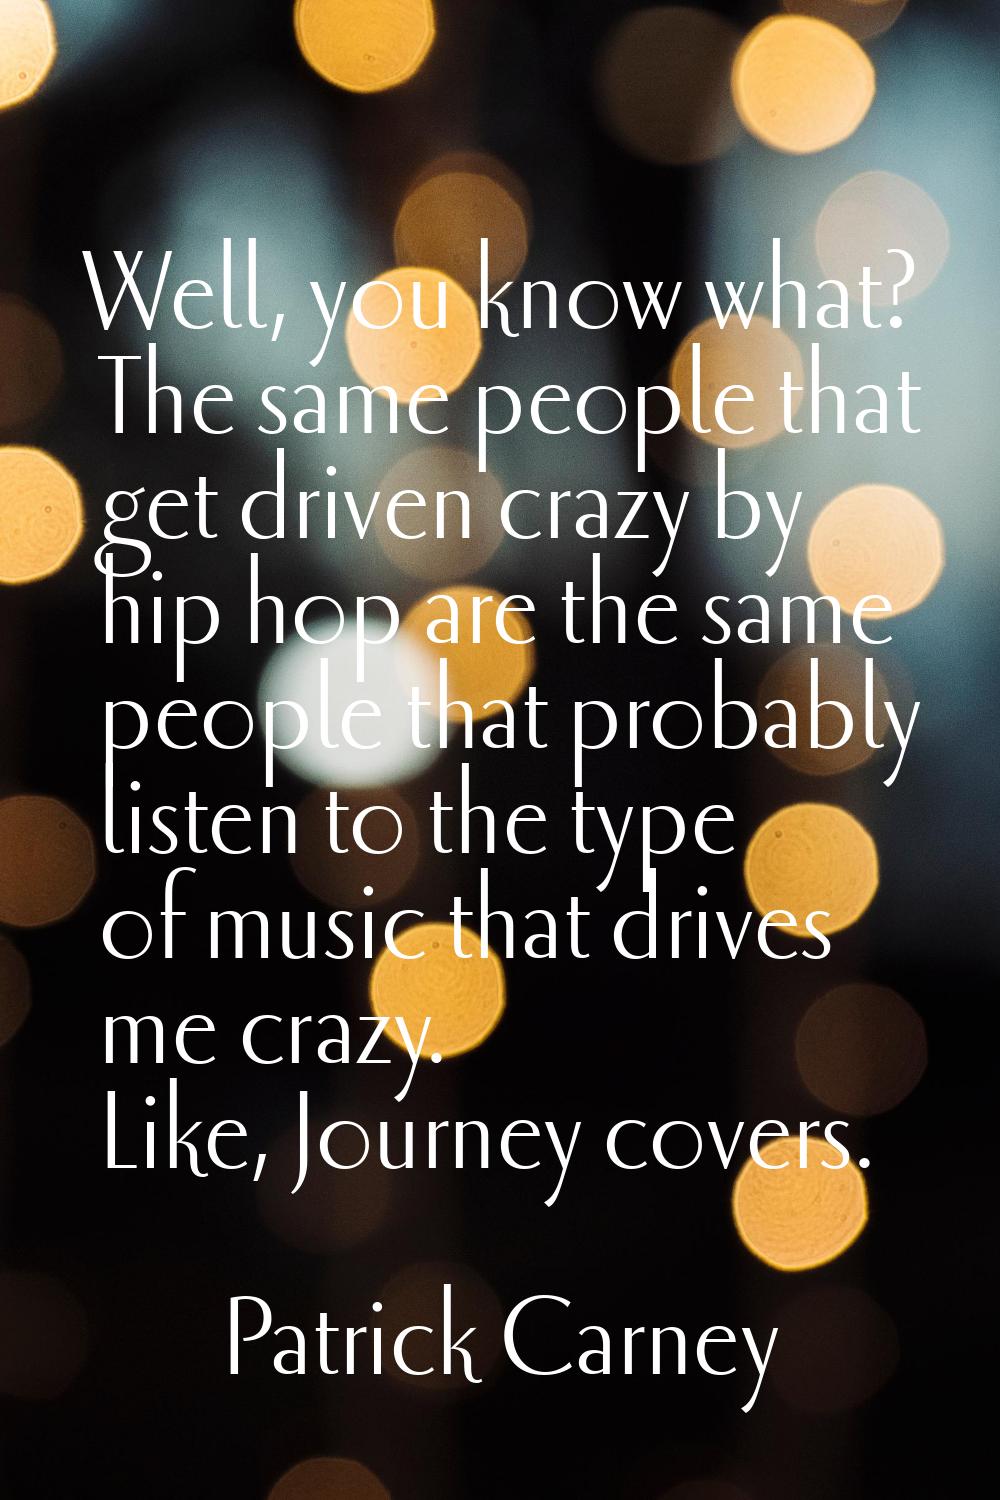 Well, you know what? The same people that get driven crazy by hip hop are the same people that prob